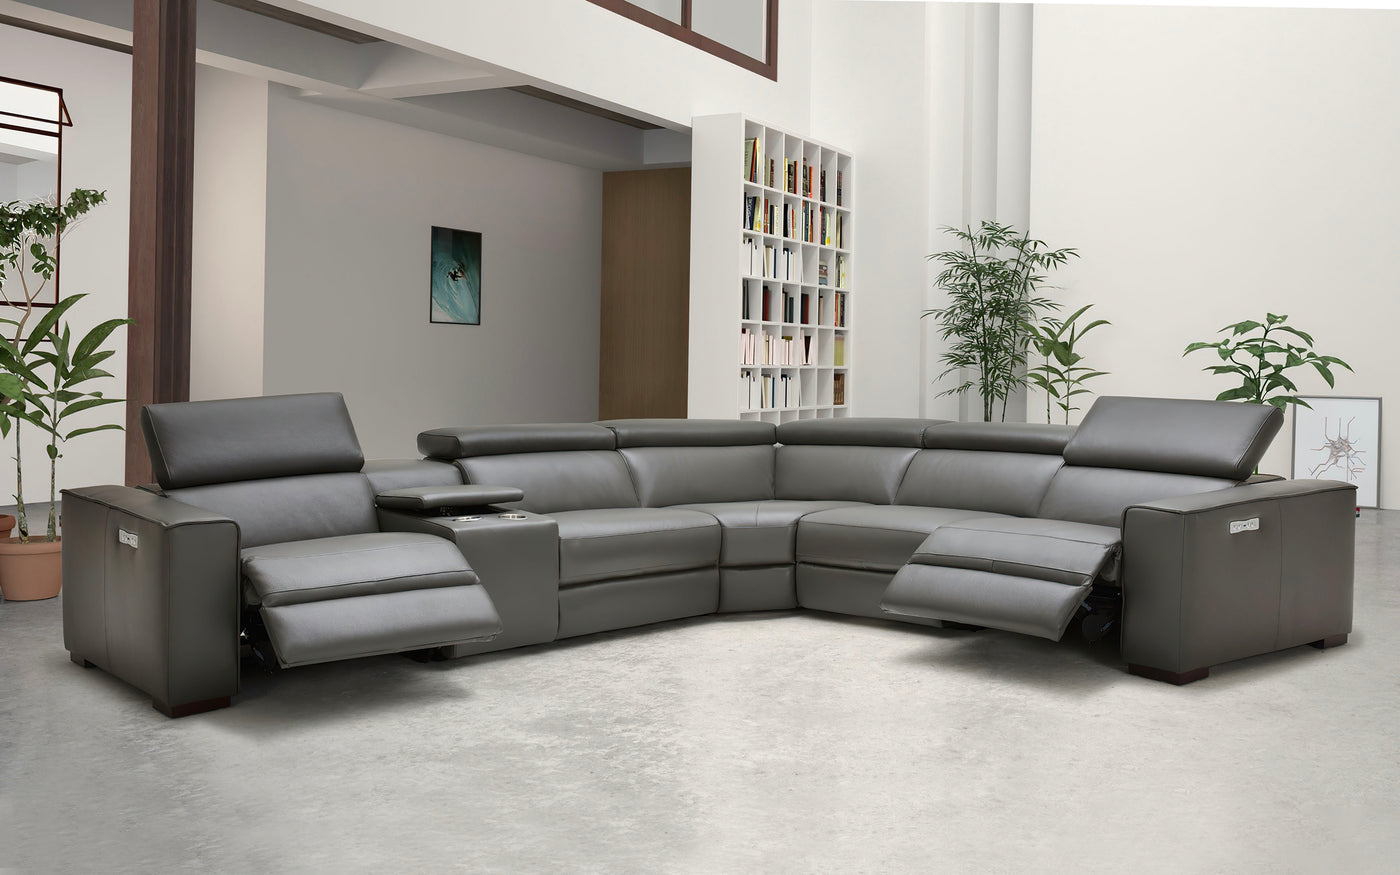 ryden 2-pc leather sectional sofa